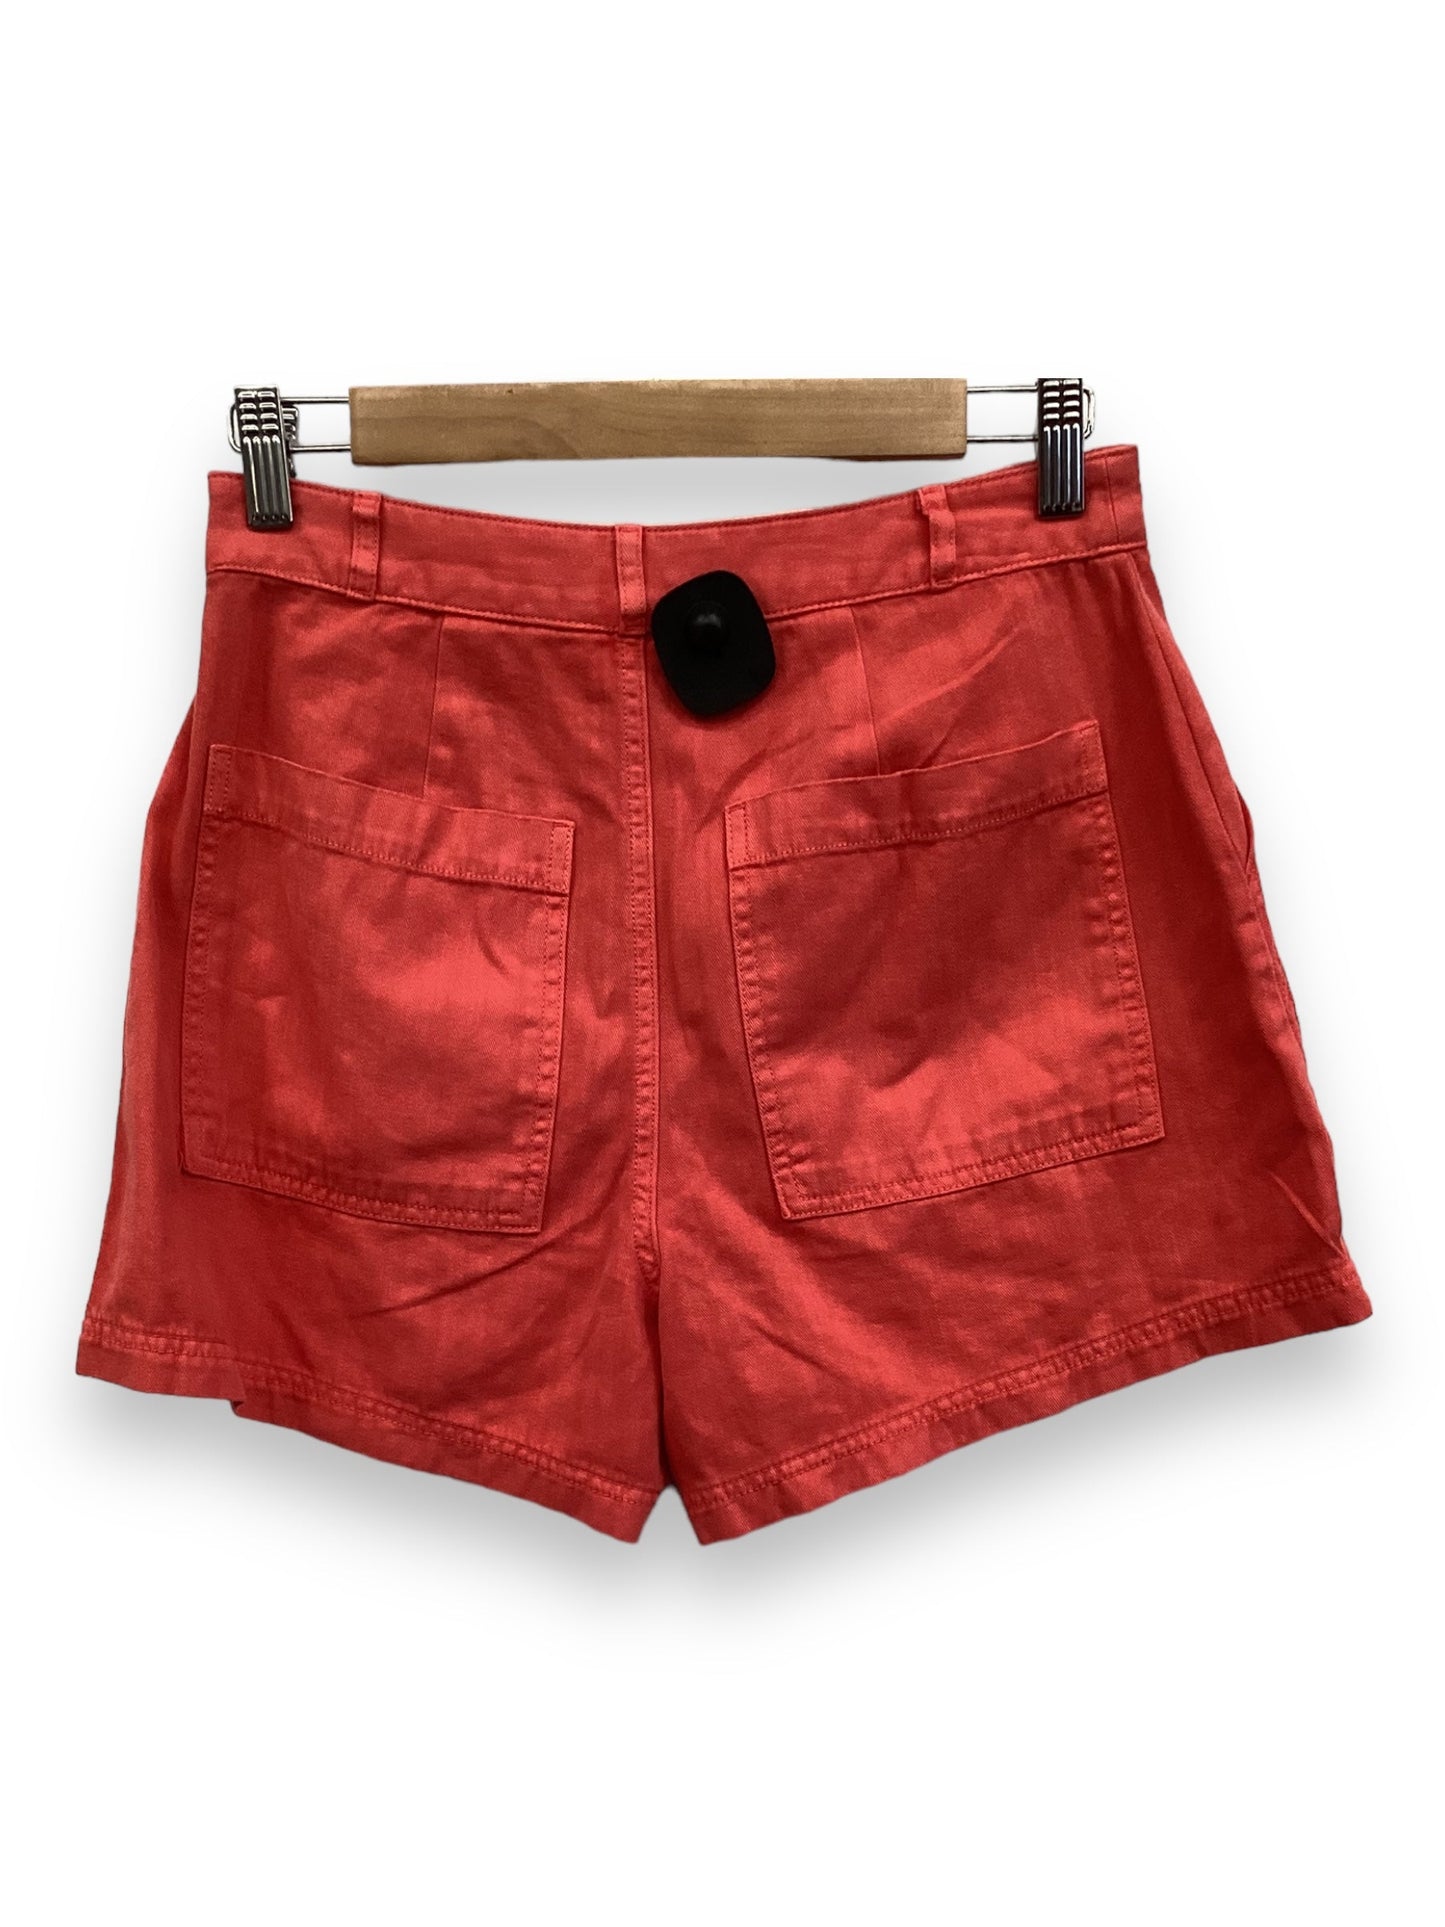 Shorts By Universal Thread  Size: 2